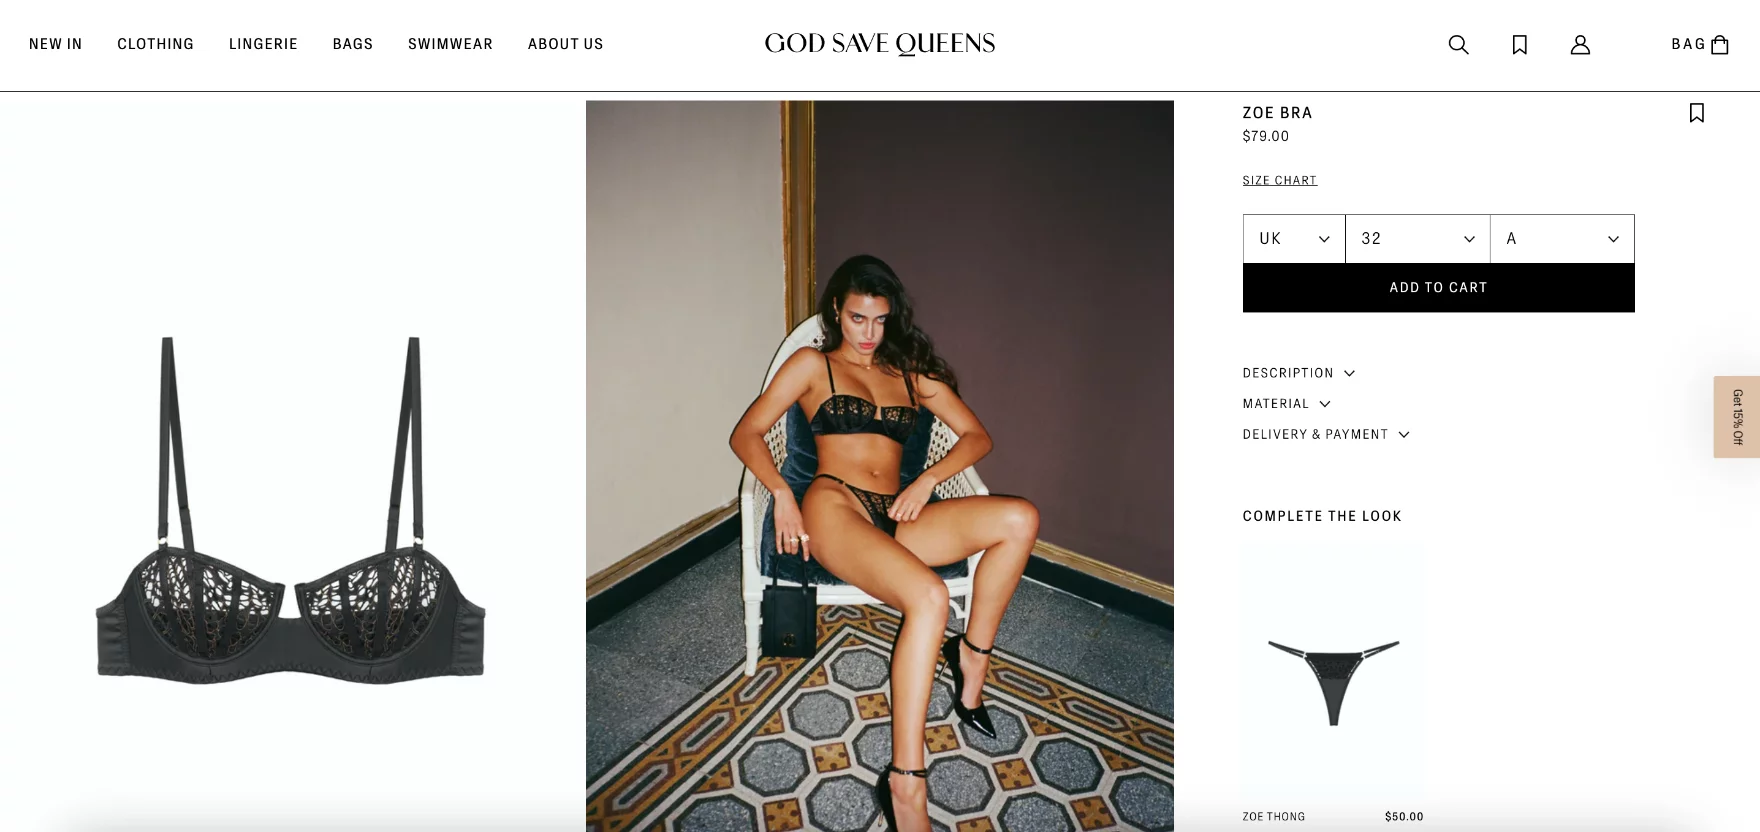 cross-selling - God Save Queens product page